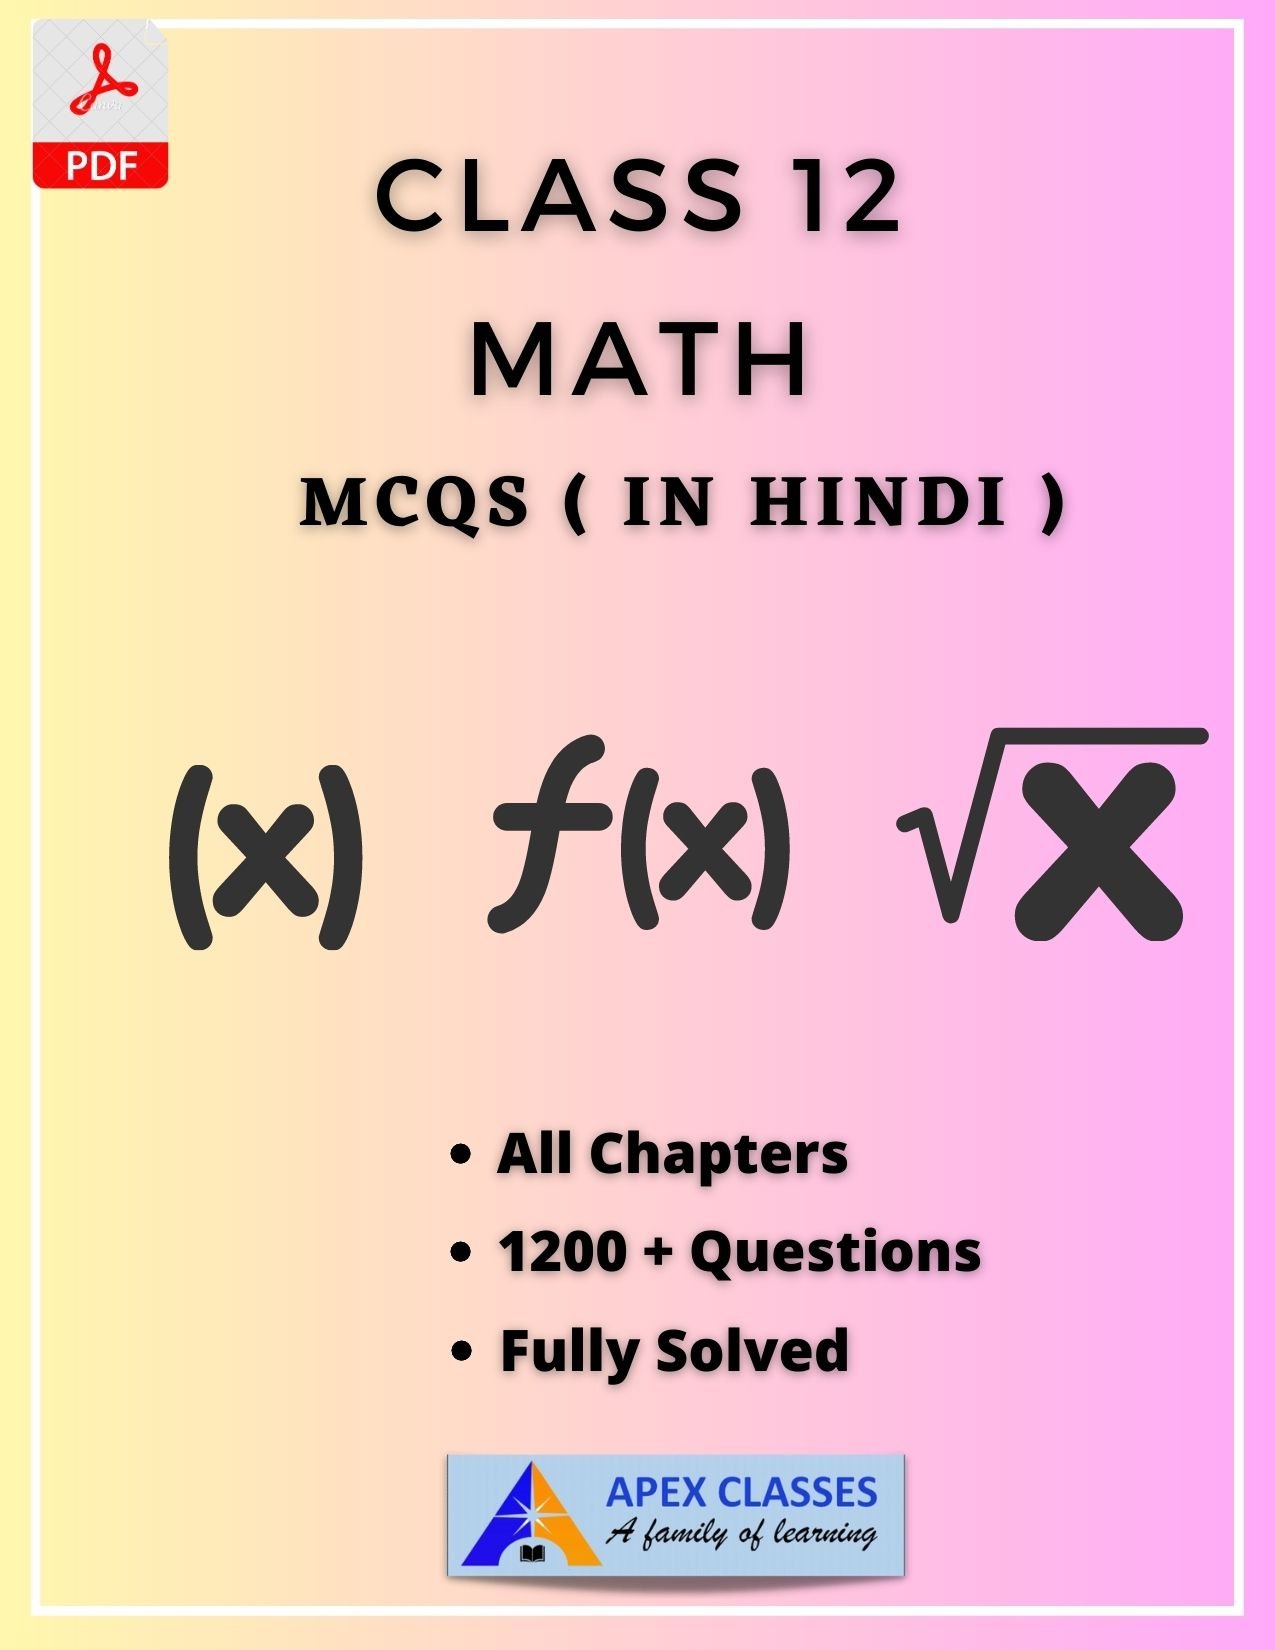 Class 12 Math MCQs all Chapters in Hindi